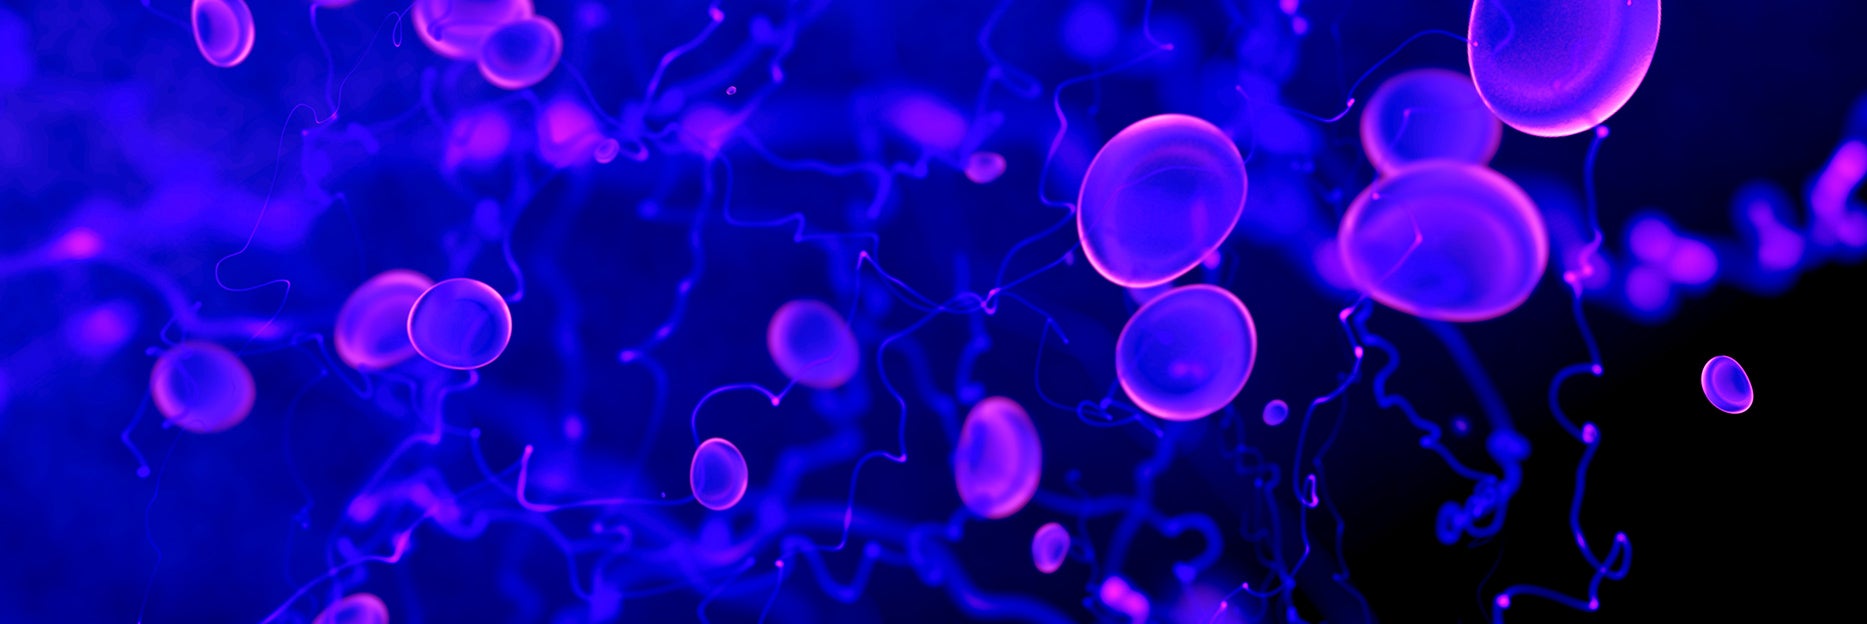 iStock Blue Glowing Cells